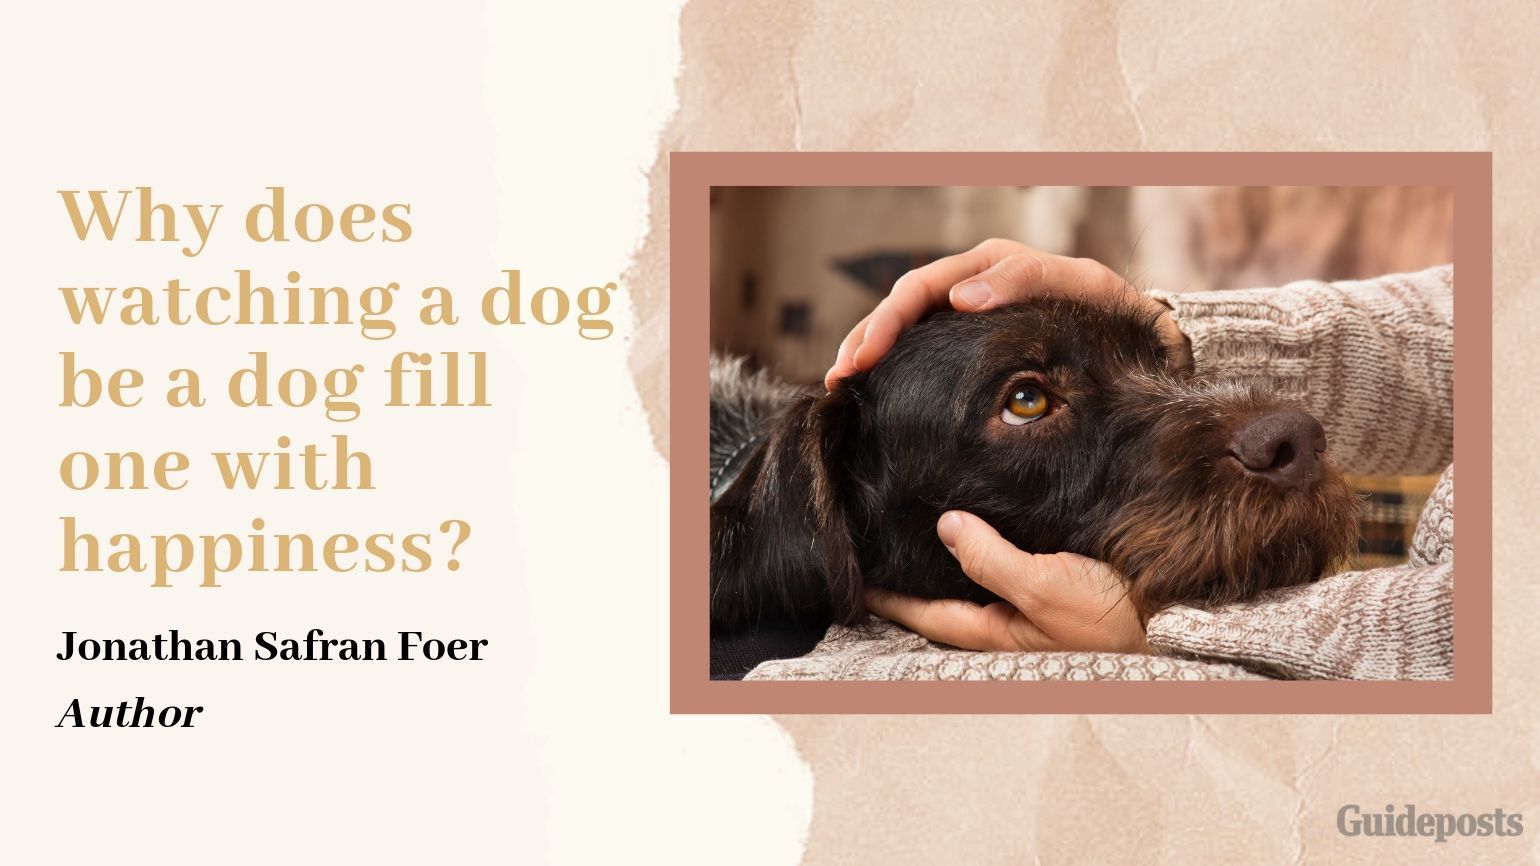 Sentimental Dog Quote: Why does watching a dog be a dog fill one with happiness? —Jonathan Safran Foer, Author dog lover